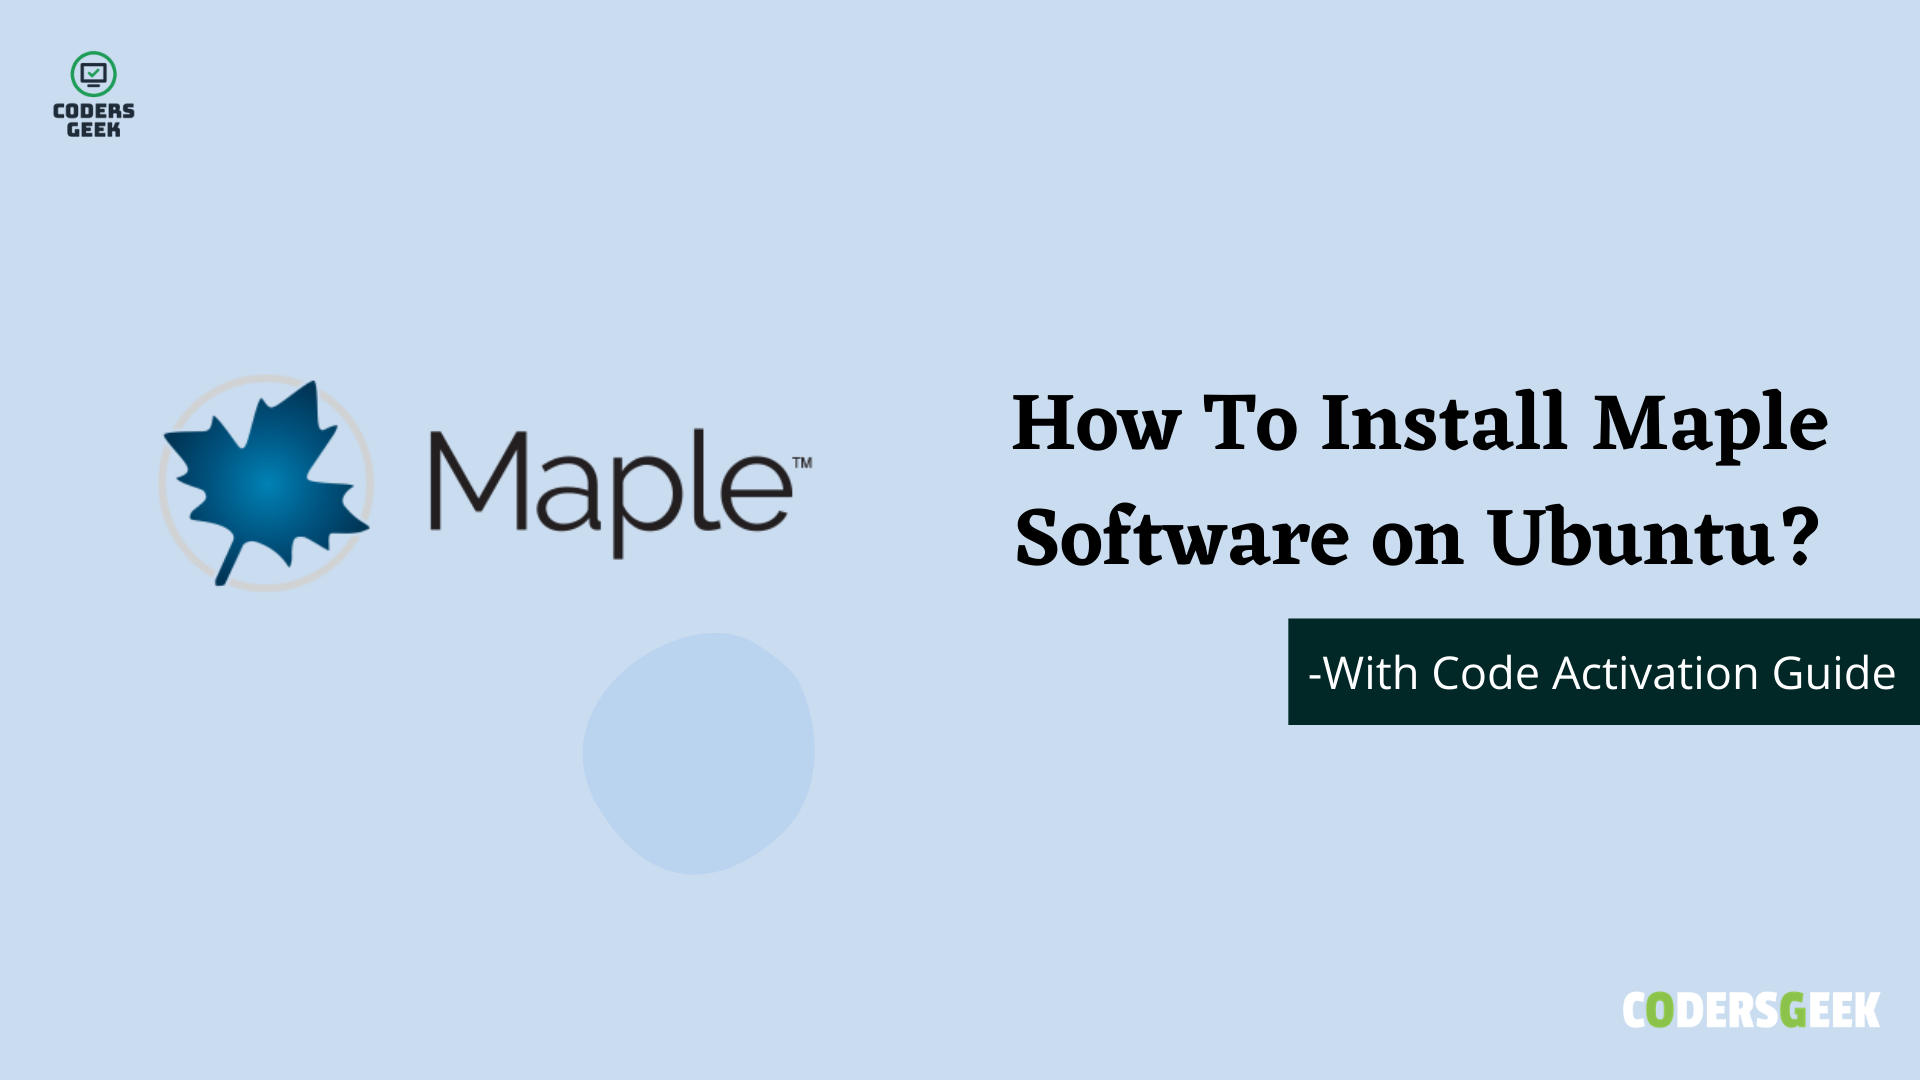 How To Install Maple Software in Ubuntu?